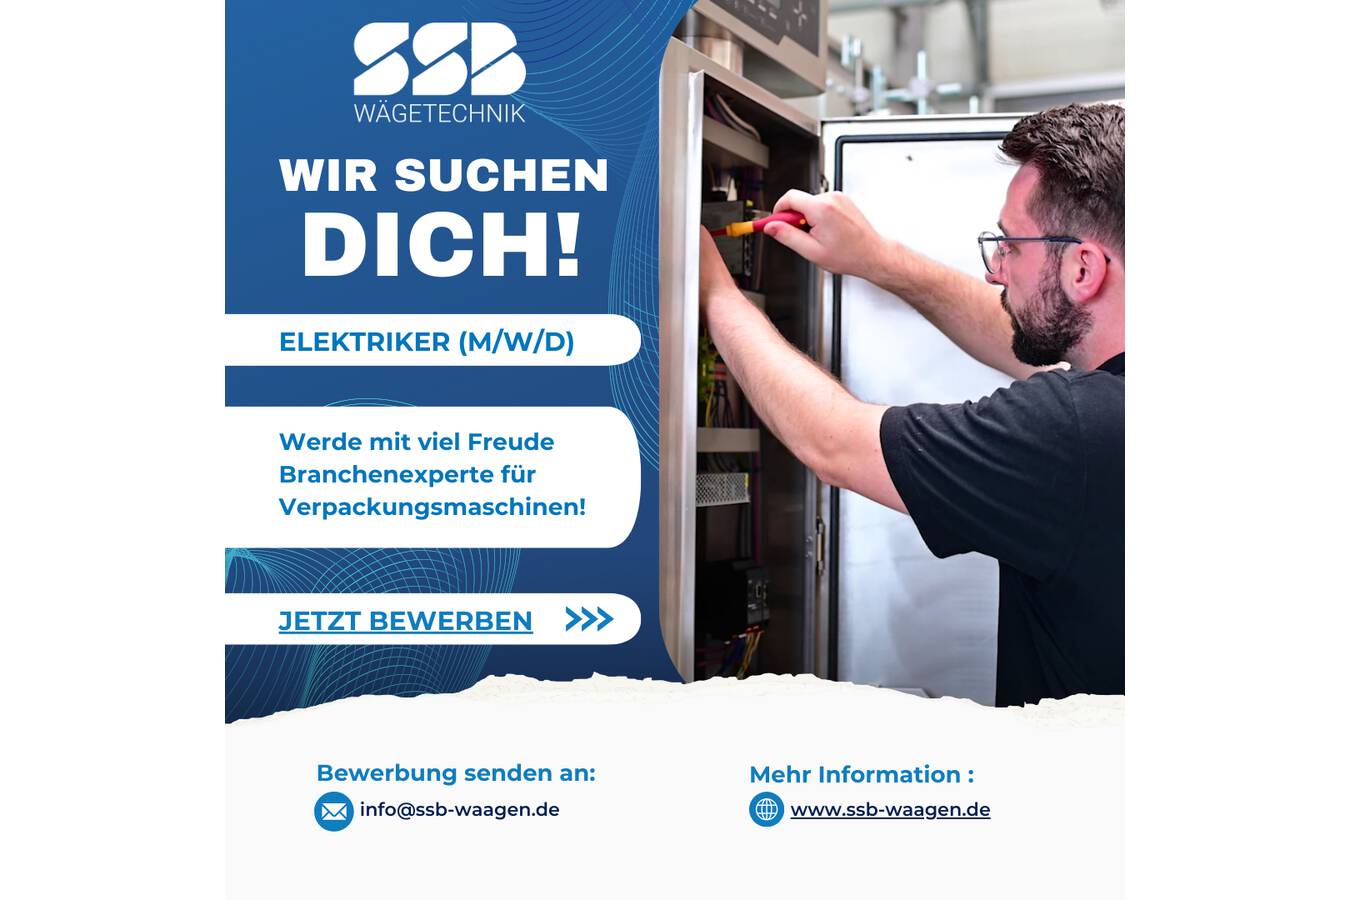 SSB Wägetechnik searches Electrician / Electronics technician (m/f/d) We are looking for you as an electrician/ electronics technician (m/f/d)